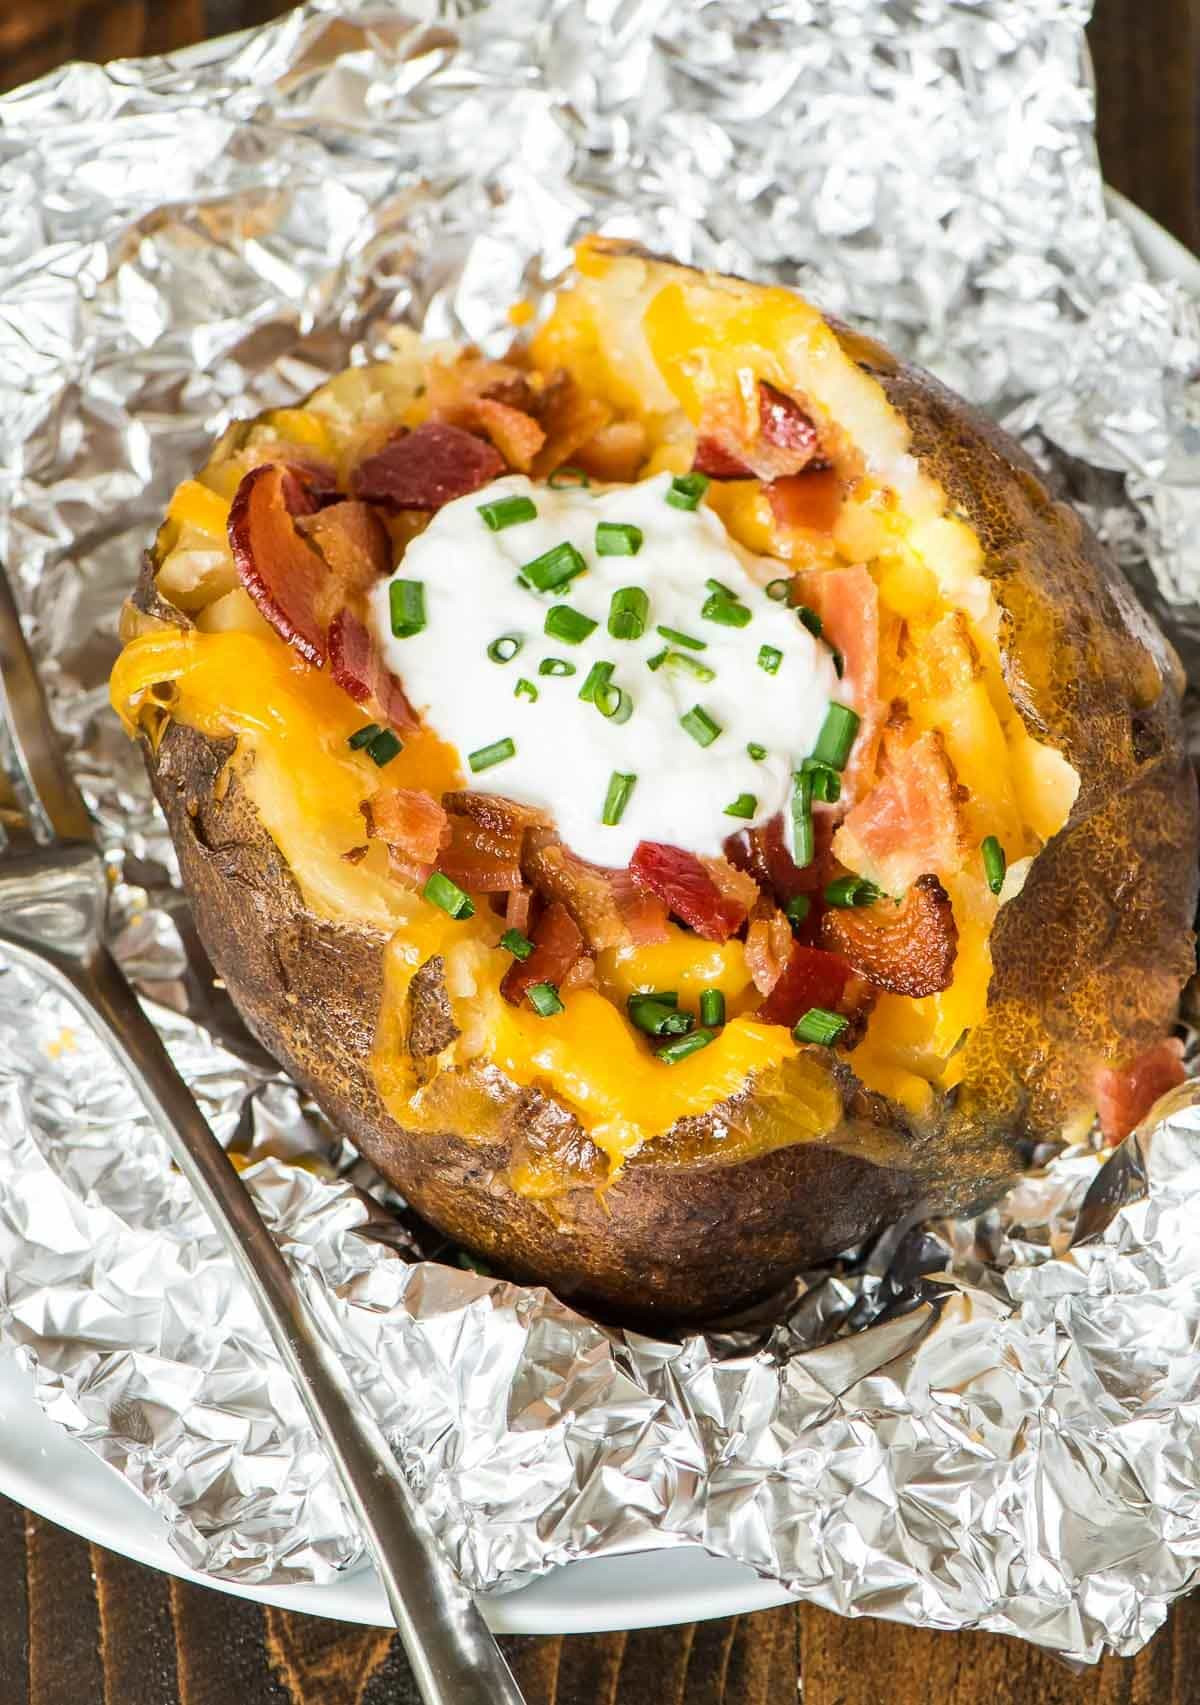 How To Cook Baked Potato
 How to Make Crock Pot Baked Potatoes